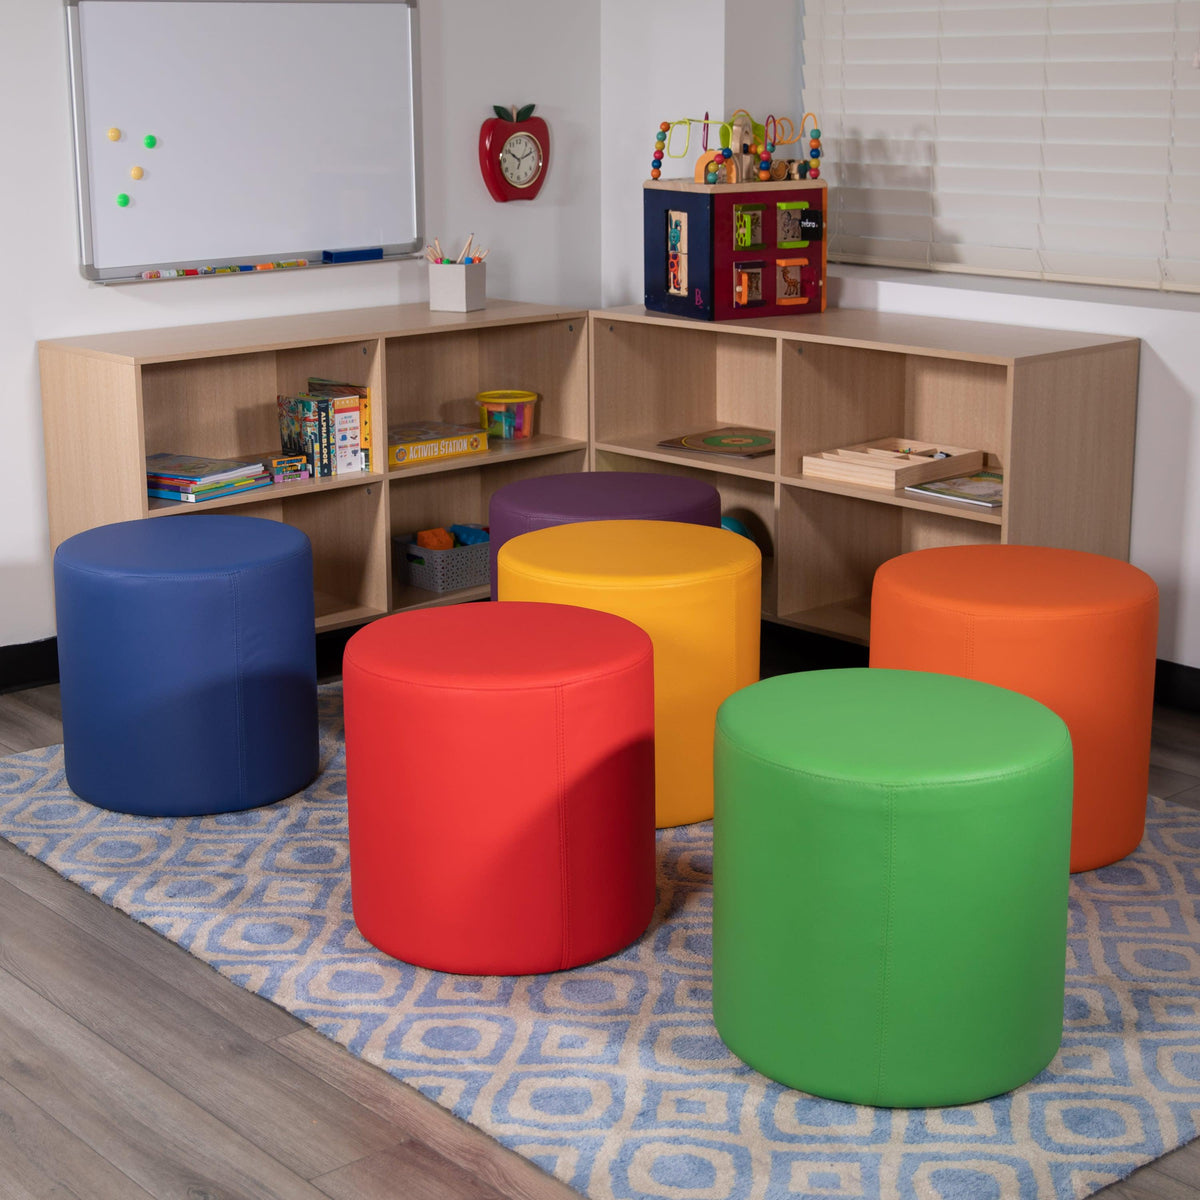 Orange |#| 18inchH Soft Seating Flexible Circle for Classrooms and Common Spaces - Orange